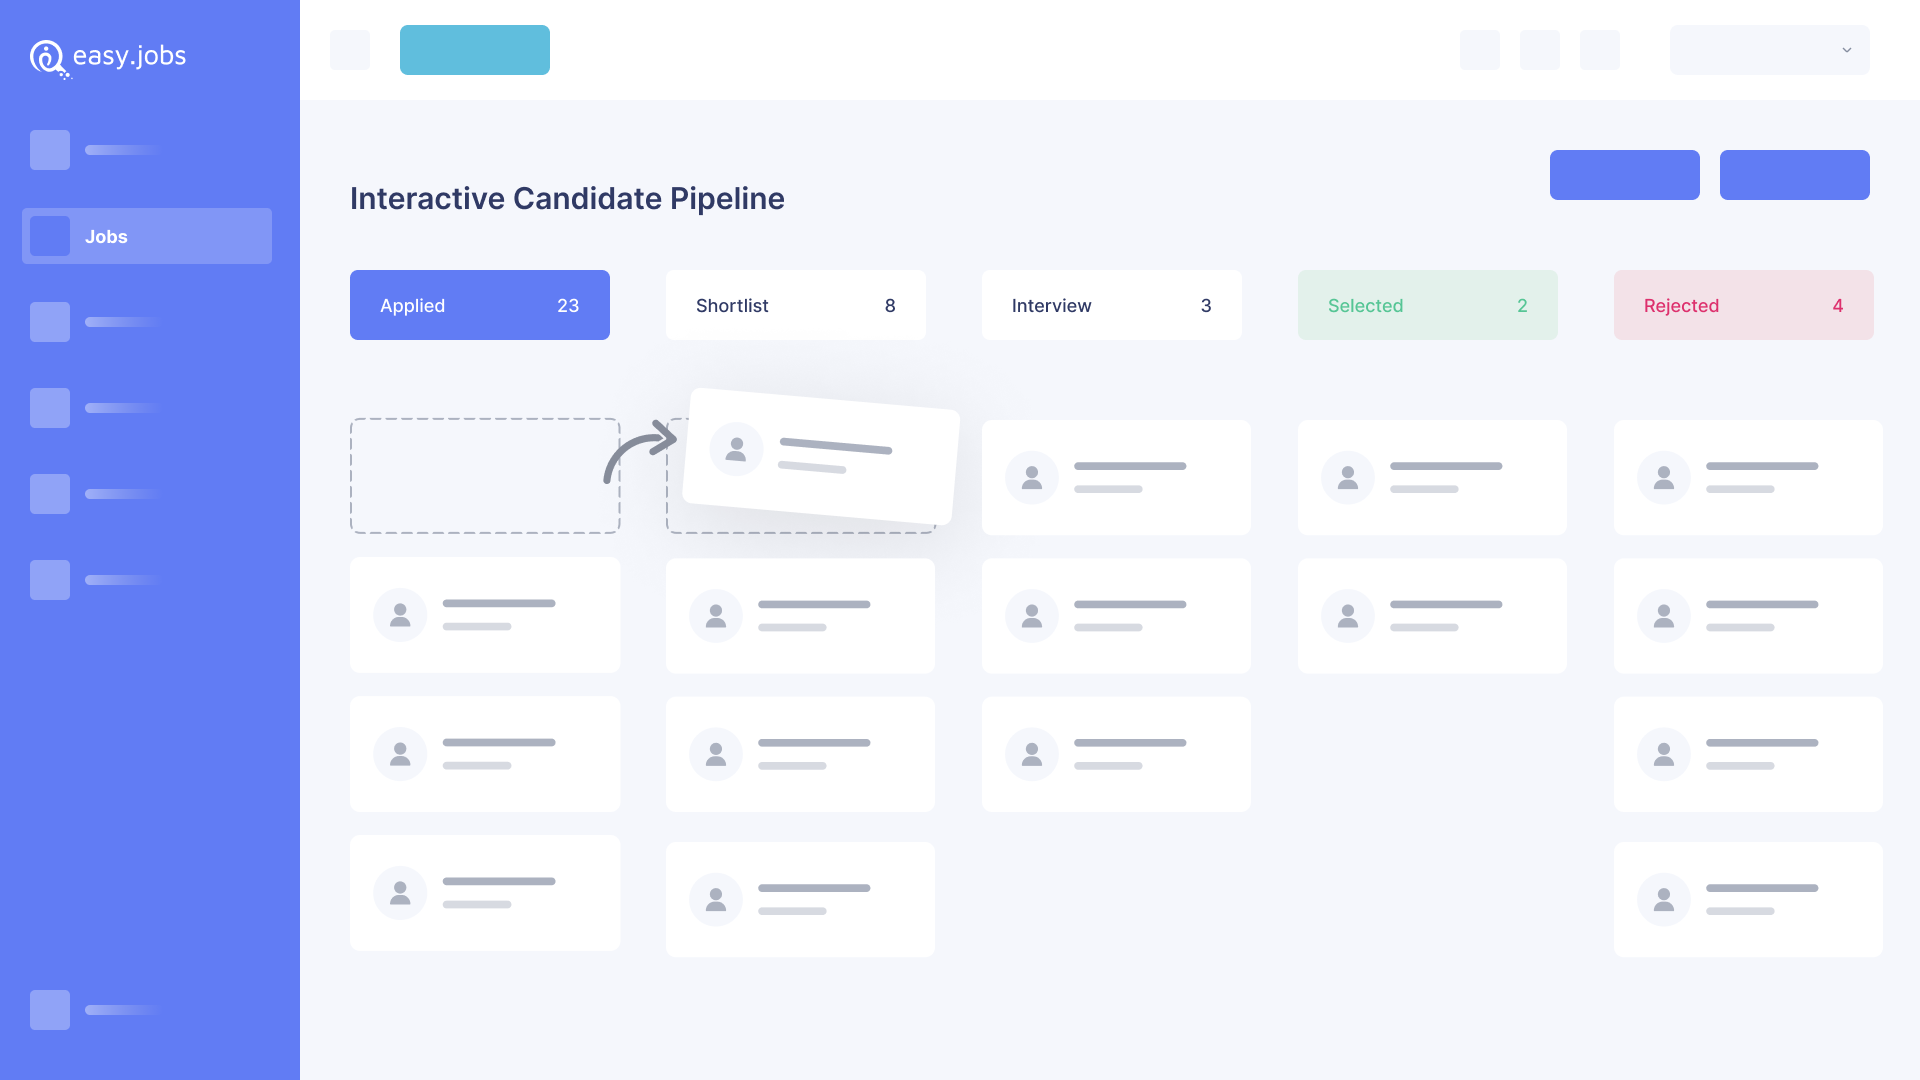 easy.jobs comes built-in with a structured candidate pipeline which allows companies to manage candidates through different recruitment levels seamlessly. You can create a new pipeline, customize it, delete it, or reset it and also drag & drop candidates.